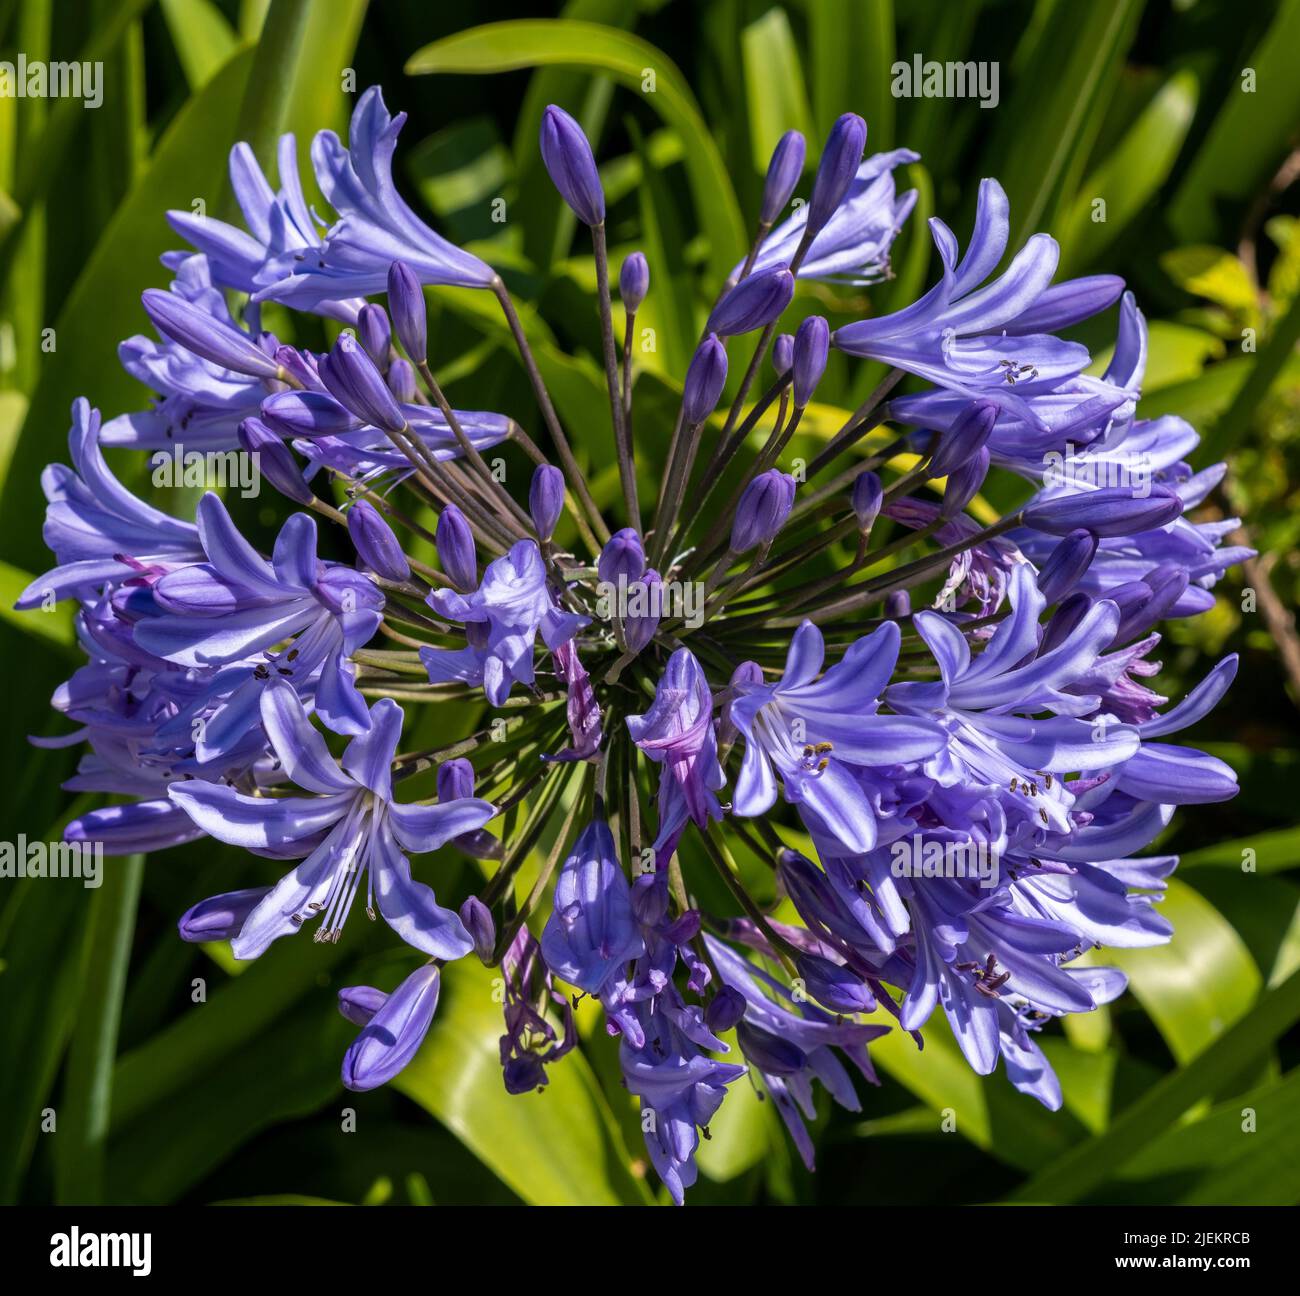 African Lily - Agapanthus praecox -(also known as Lily of the Nile) flower head Stock Photo